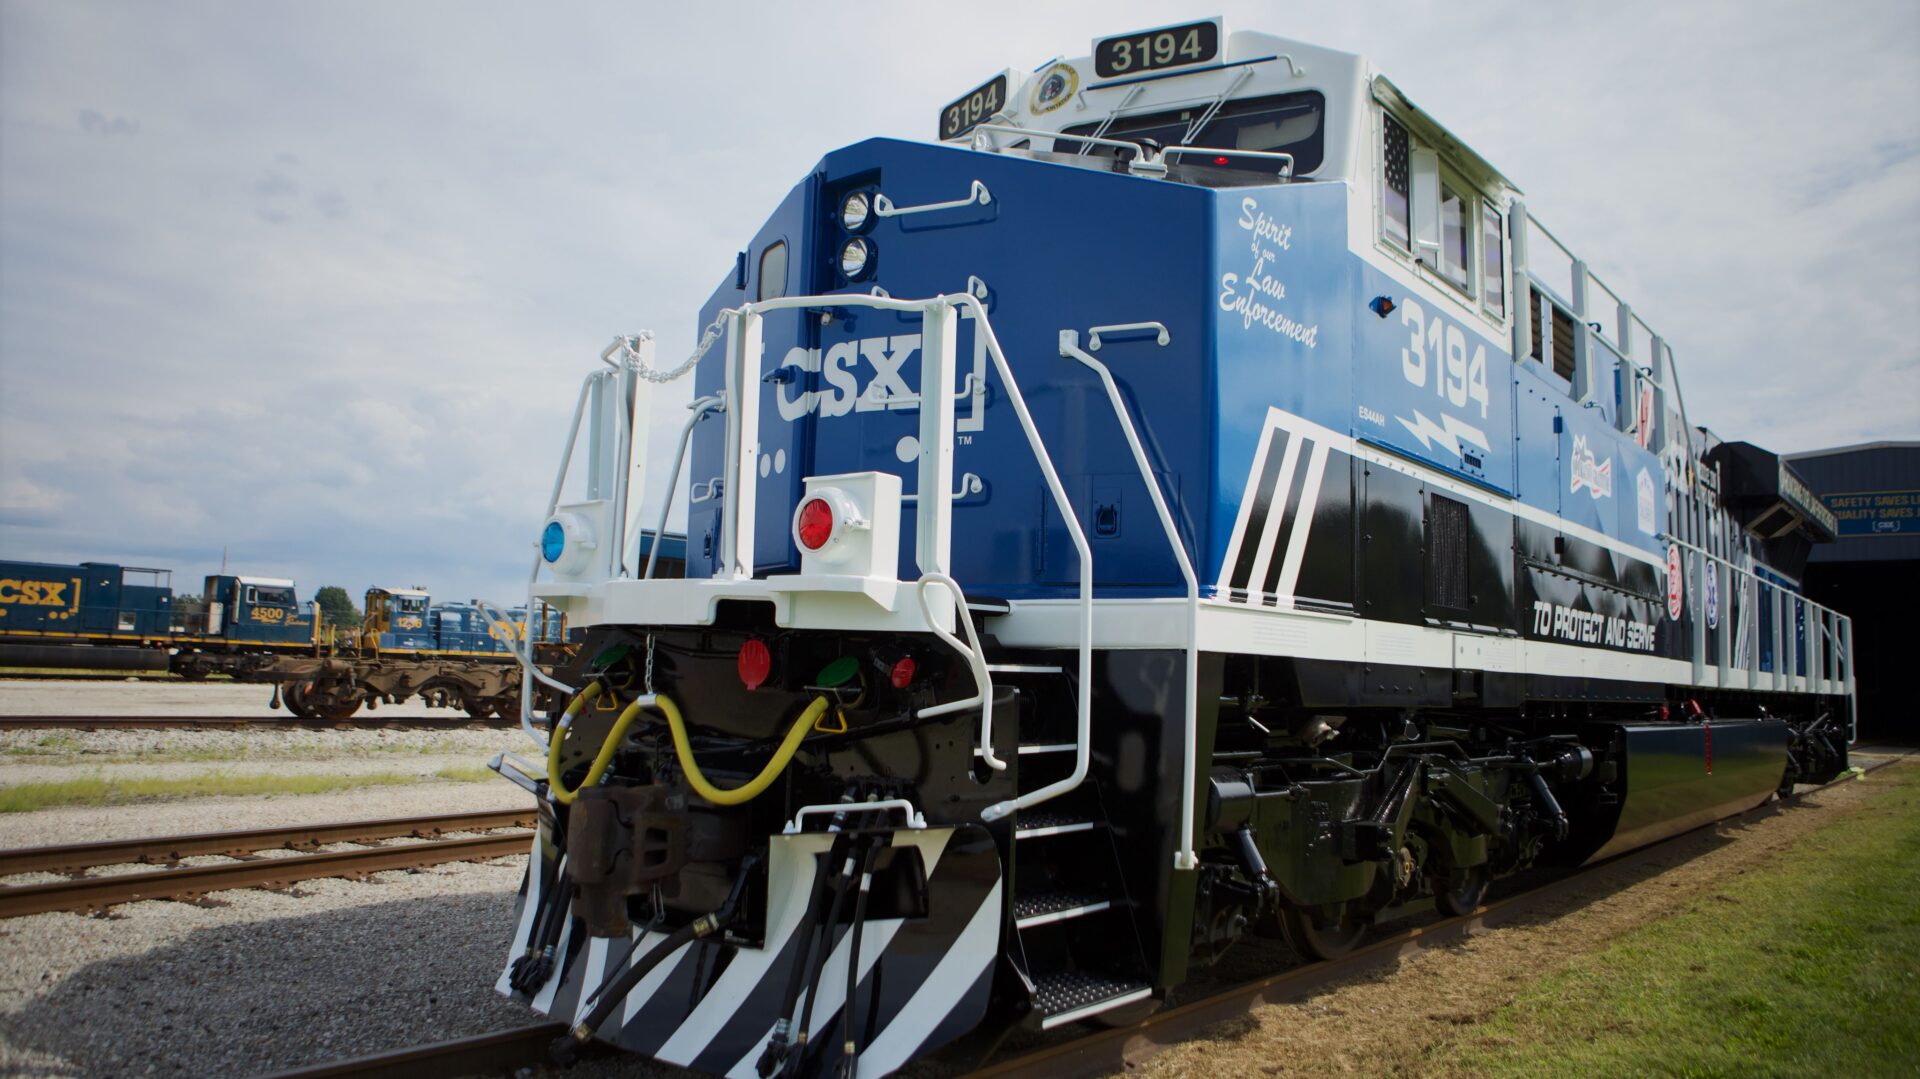 A blue and white CSX locomotive is painted to honor law enforcement. It sits prominently with other locomotives in the background.